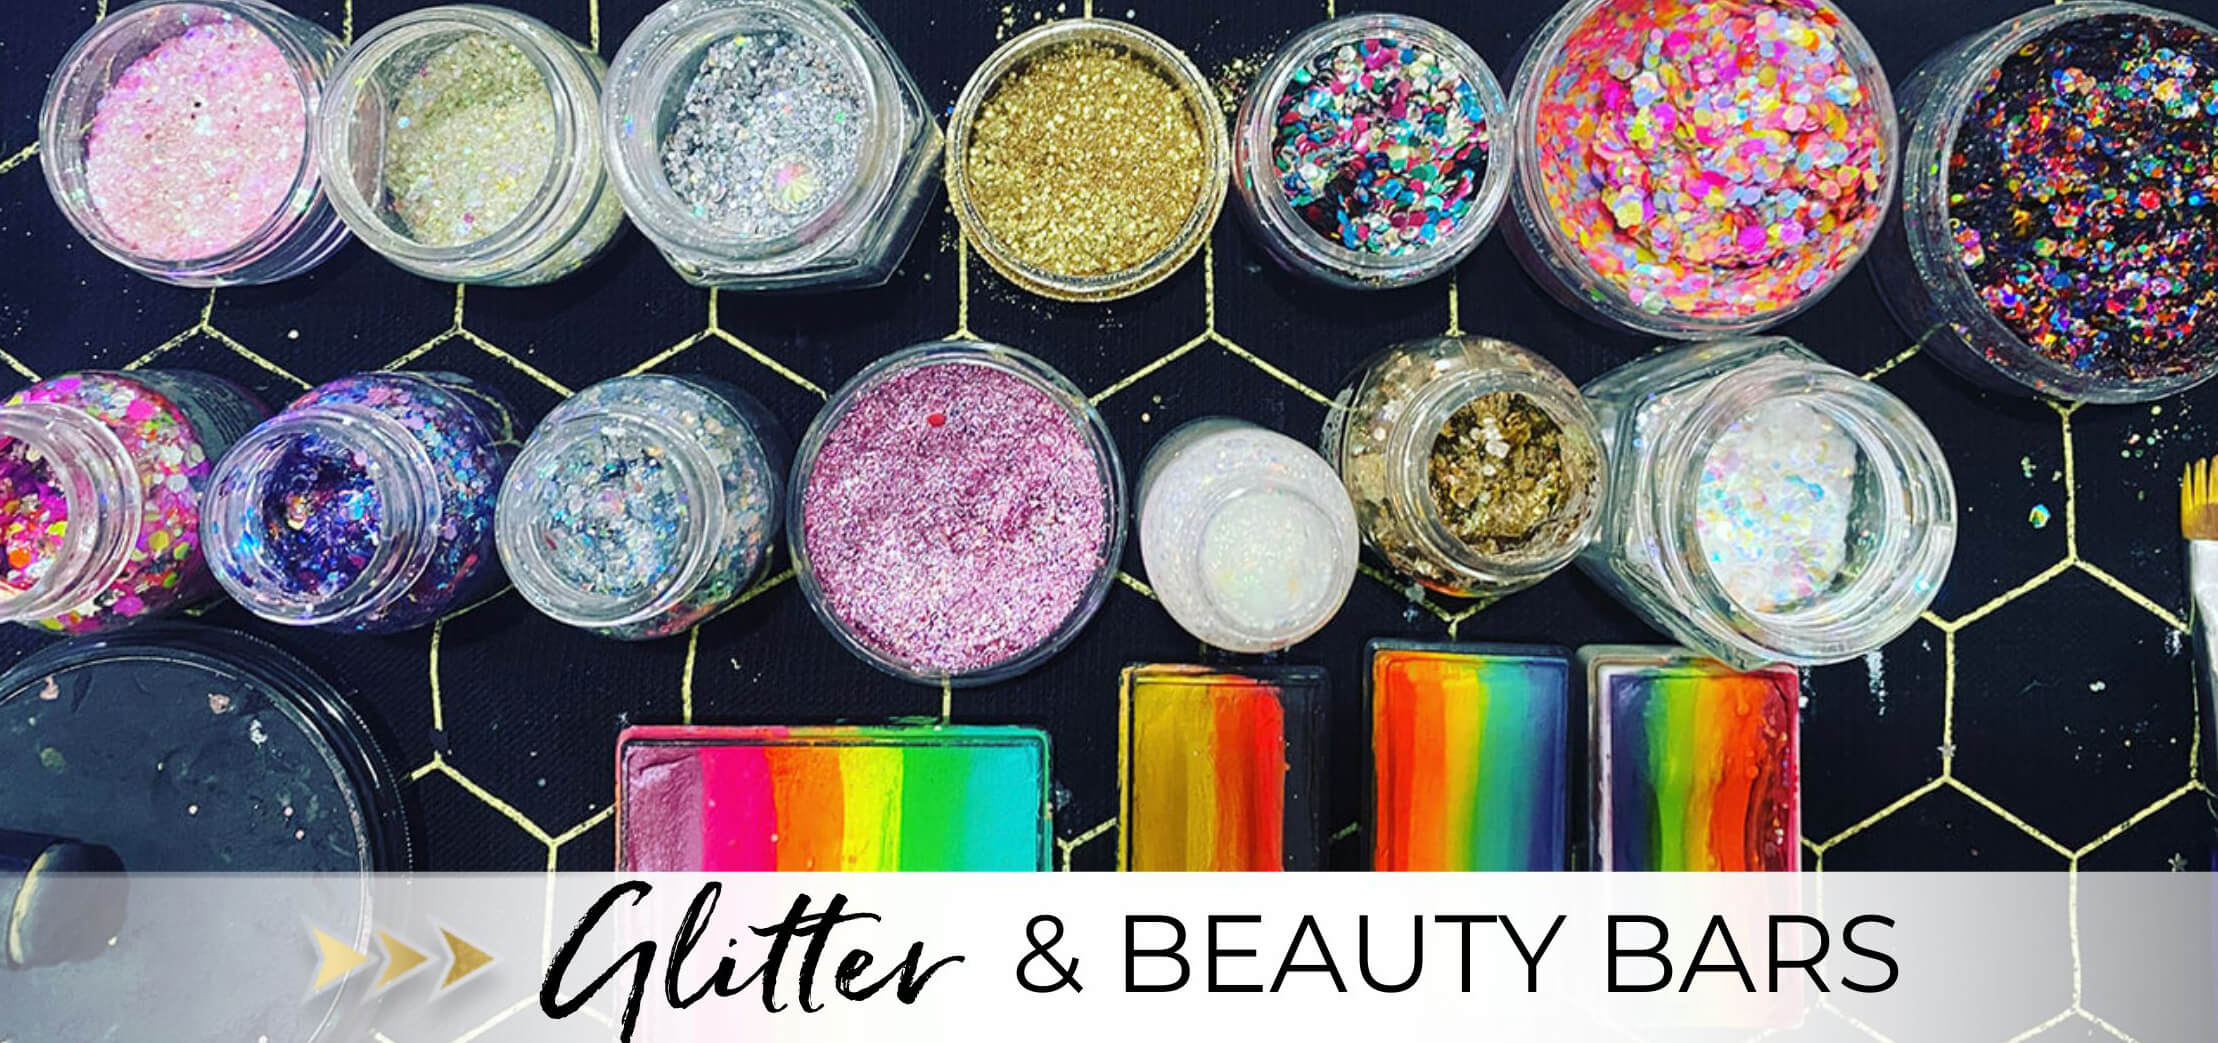 Book Beauty Bars & Glitter bars for parties in Bay Area 